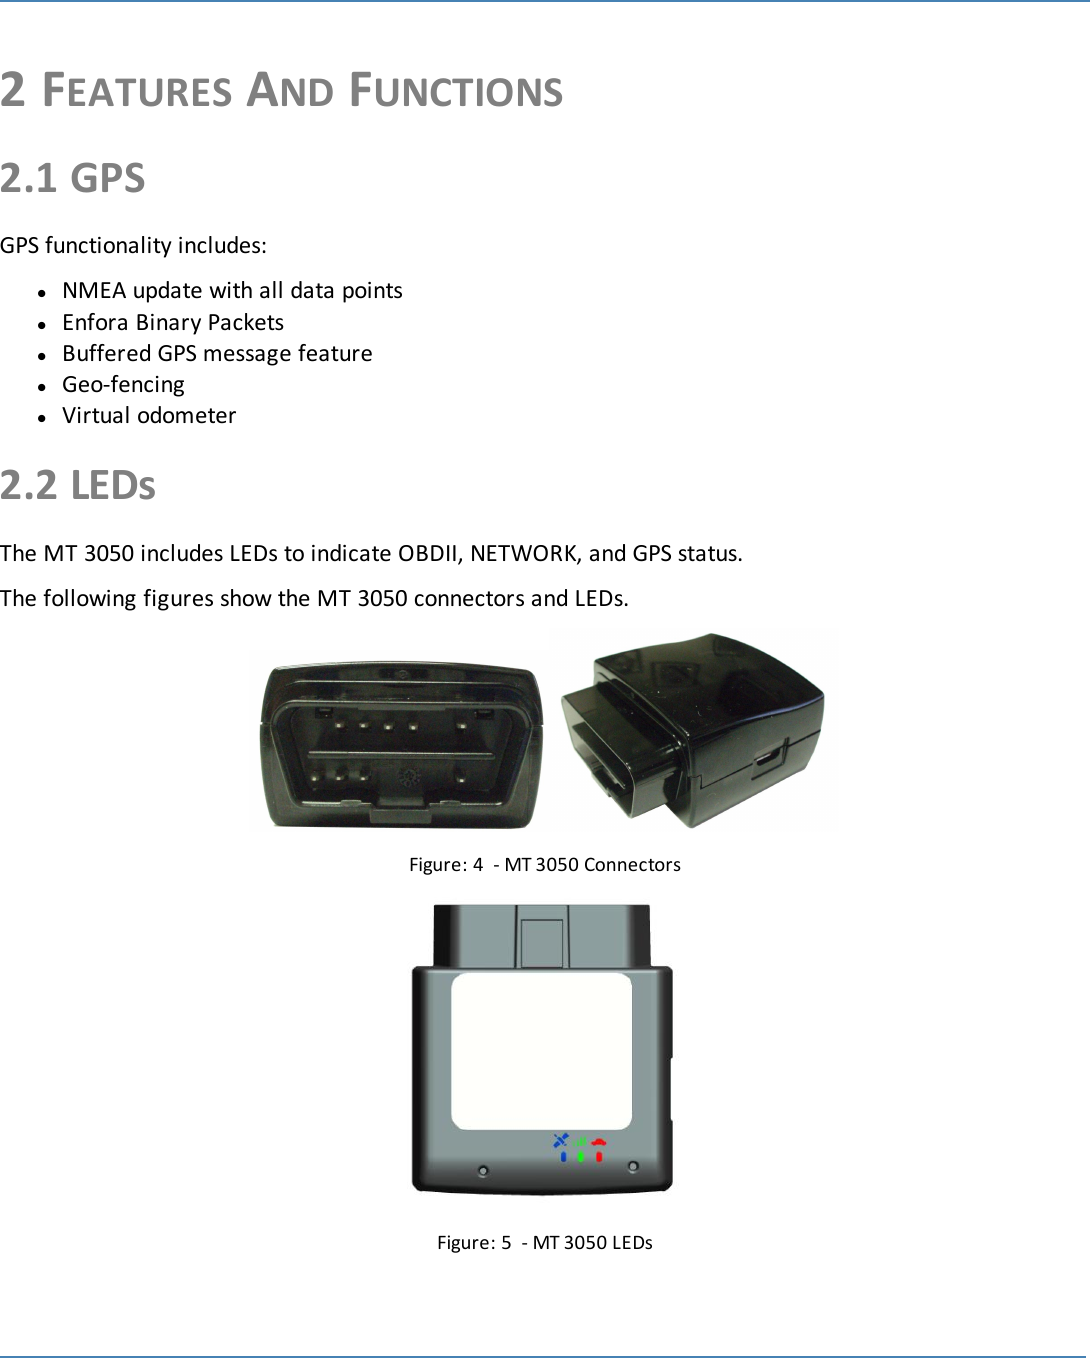 62 FEATURES AND FUNCTIONS2.1 GPSGPS functionality includes:lNMEA update with all data pointslEnfora Binary PacketslBuffered GPS message featurelGeo-fencinglVirtual odometer2.2 LEDsThe MT 3050 includes LEDs to indicate OBDII, NETWORK, and GPS status.The following figures show the MT 3050 connectors and LEDs.Figure: 4 - MT 3050 ConnectorsFigure: 5 - MT 3050 LEDs